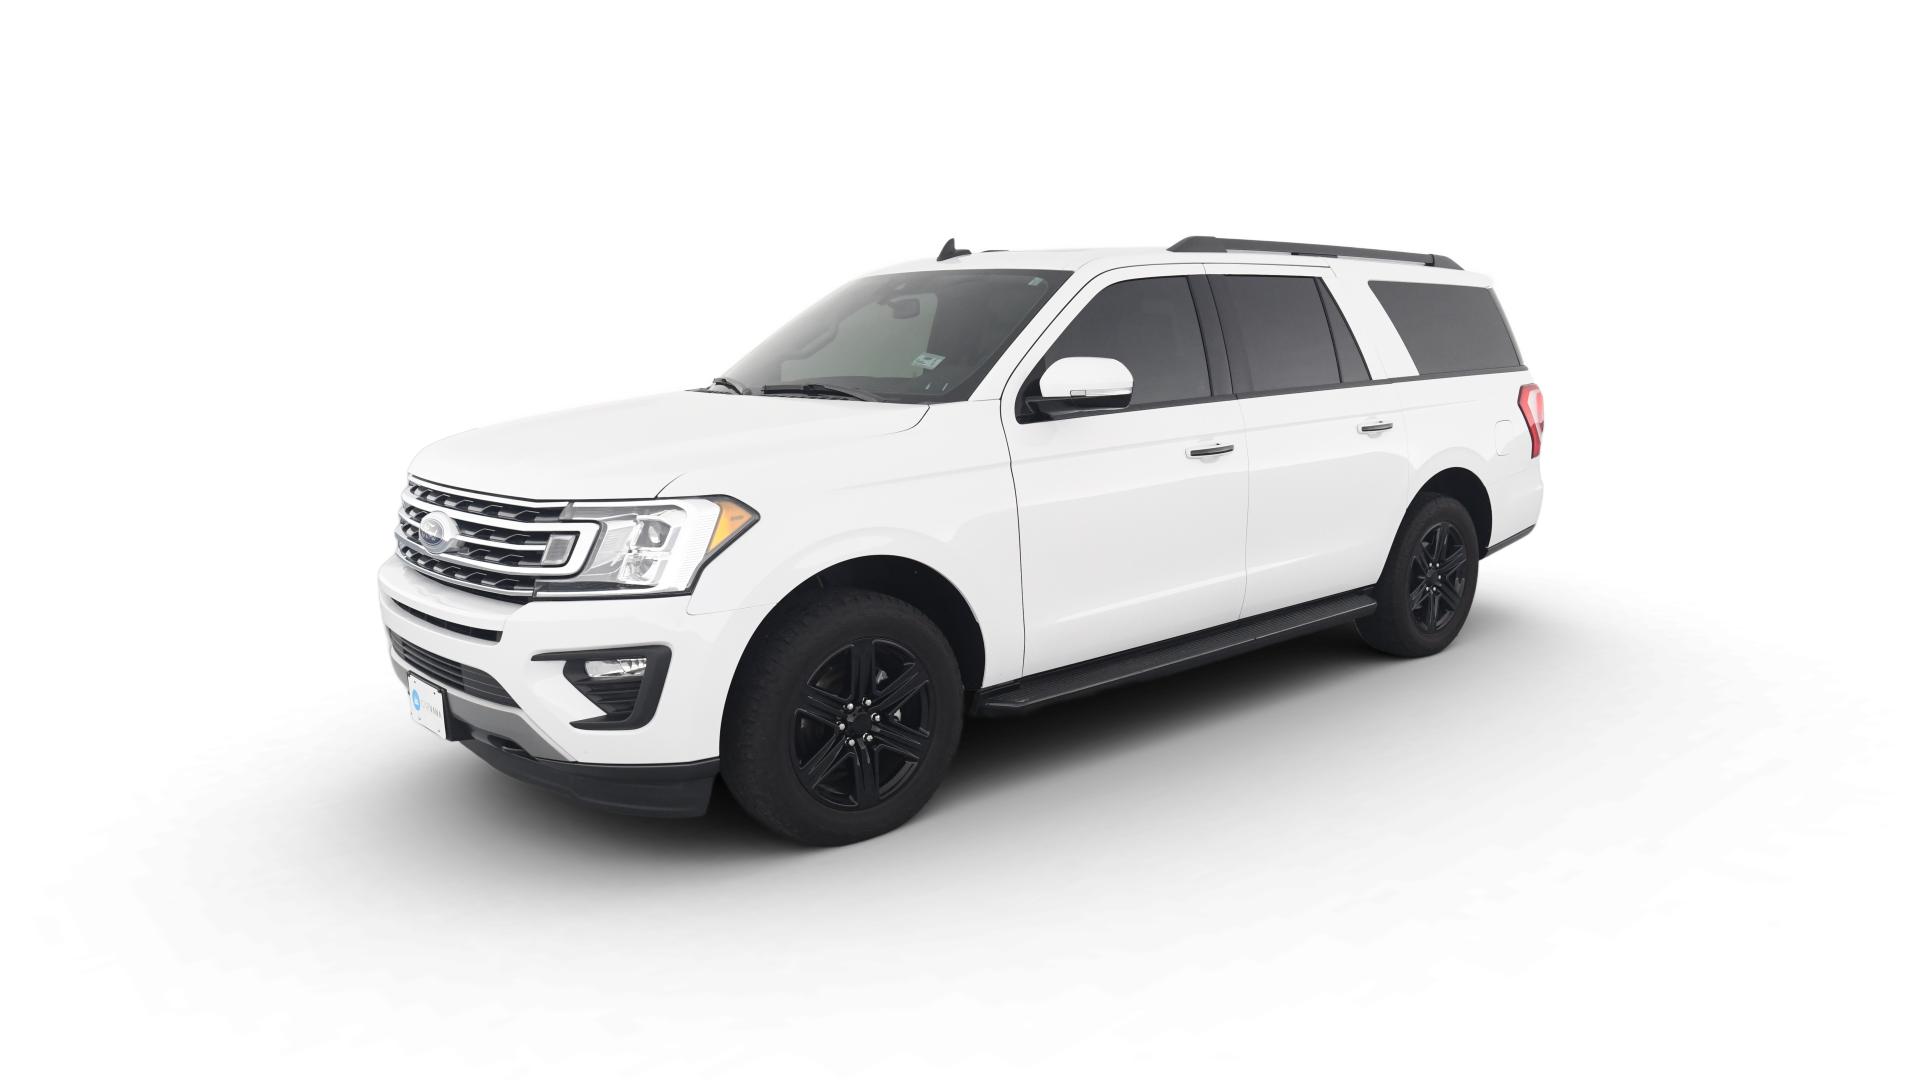 Ford Expedition MAX model image.